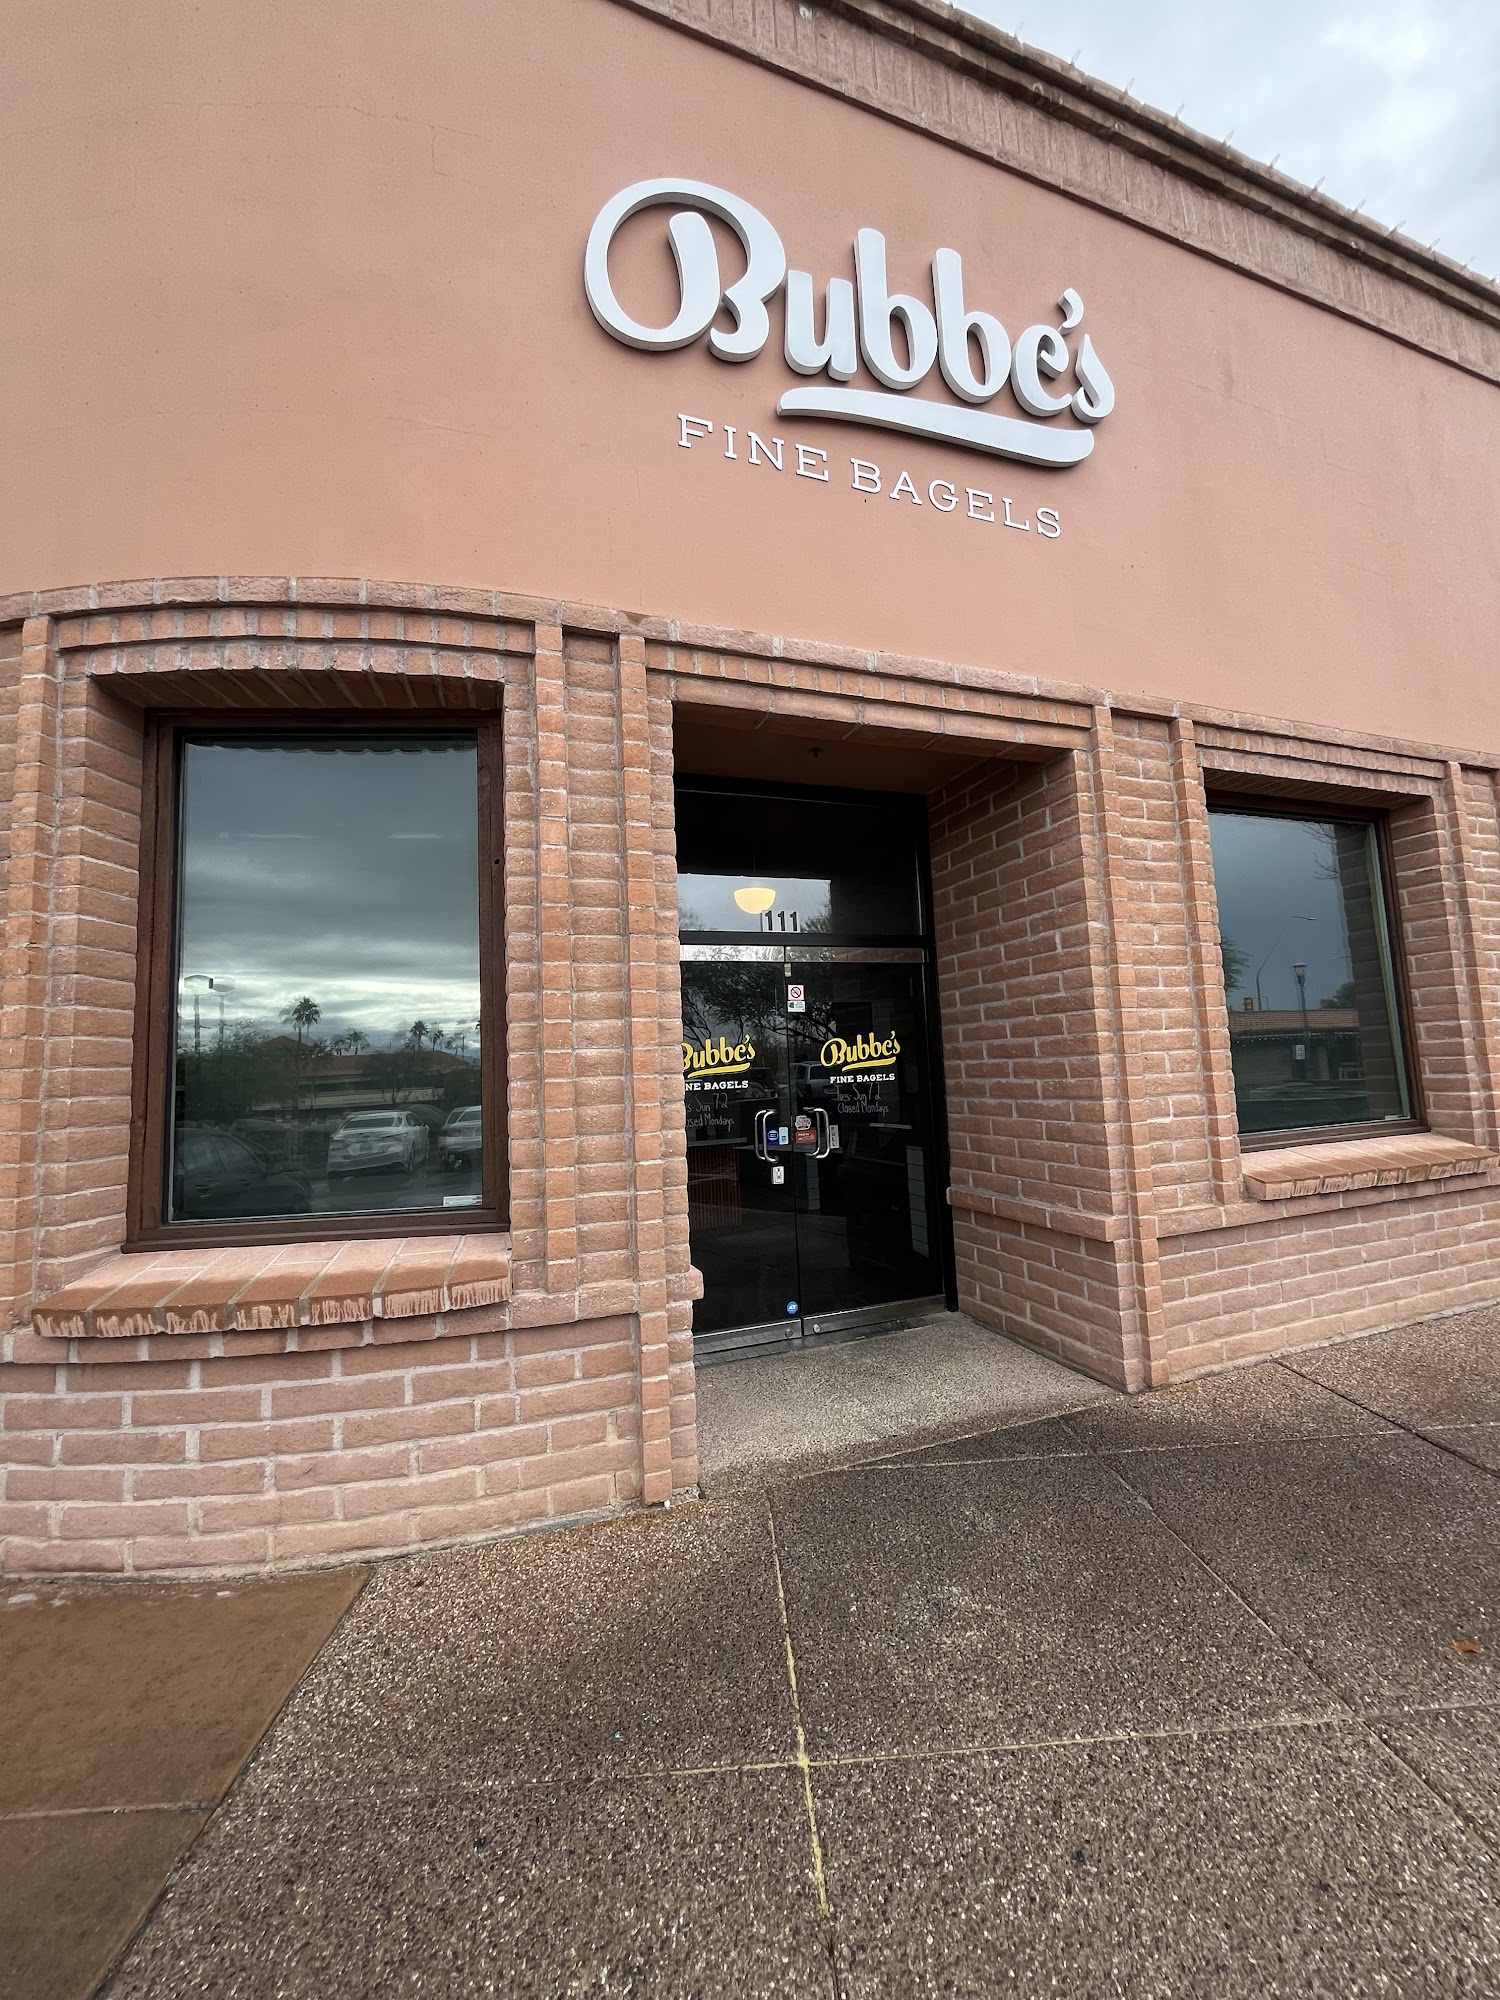 Bubbe's Bagels